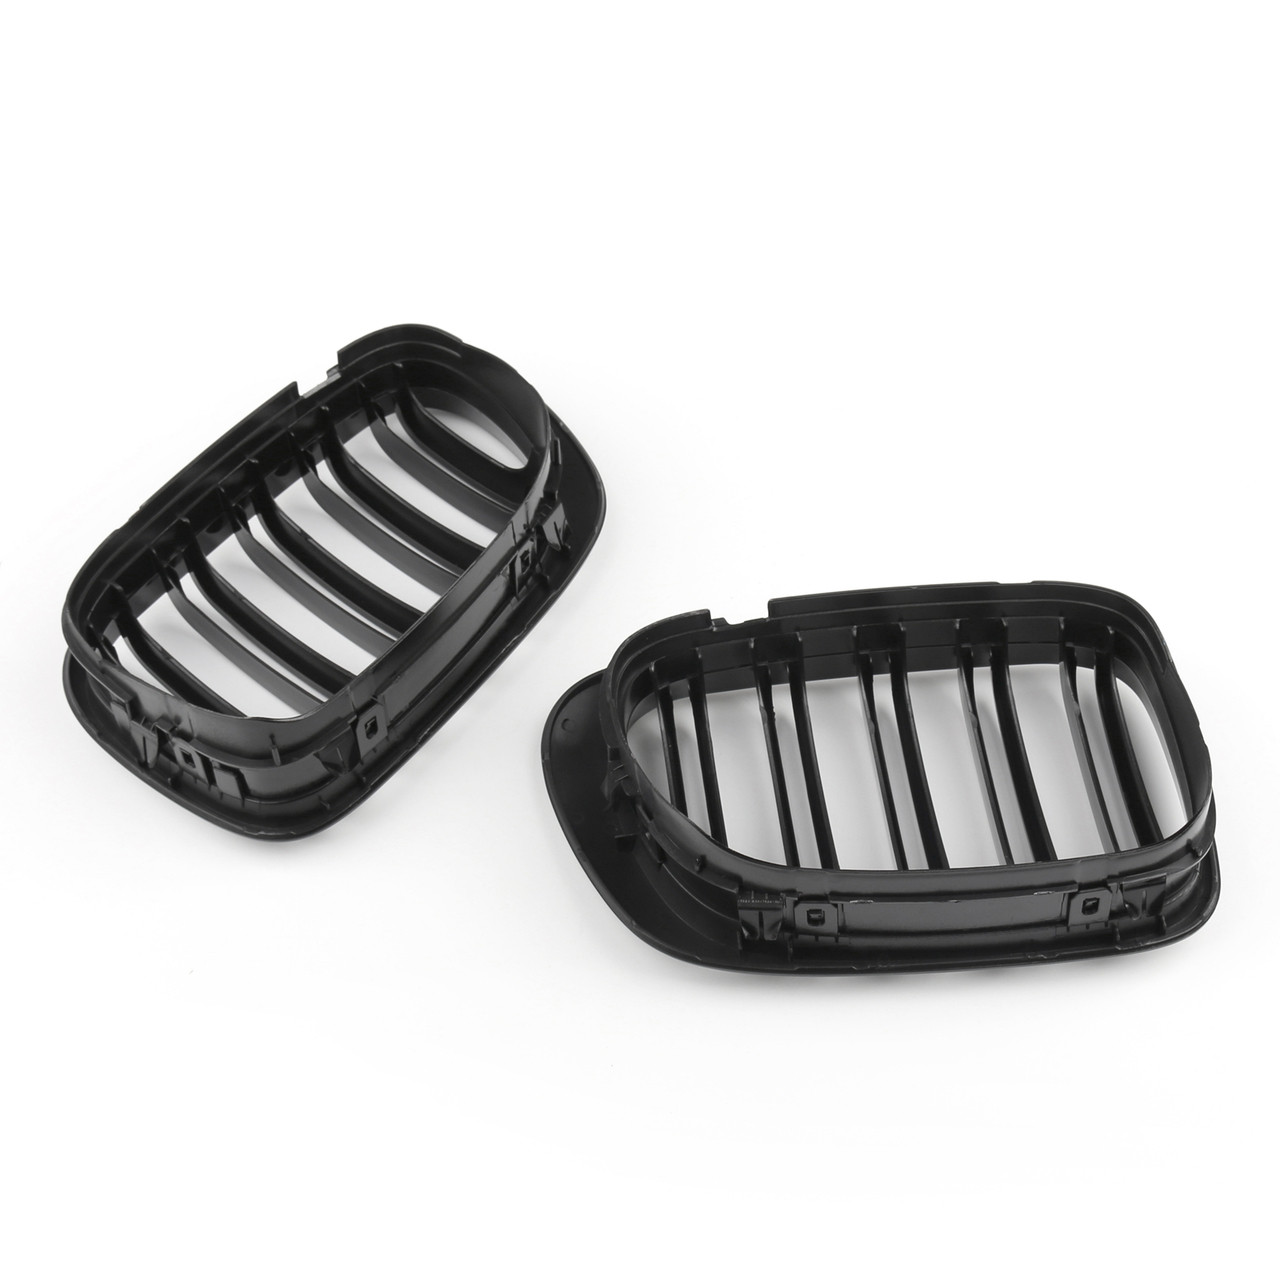 Kidney Grilles Double Rib BMW E46 3 Series Coupe 2 Door (1998-2001), Black